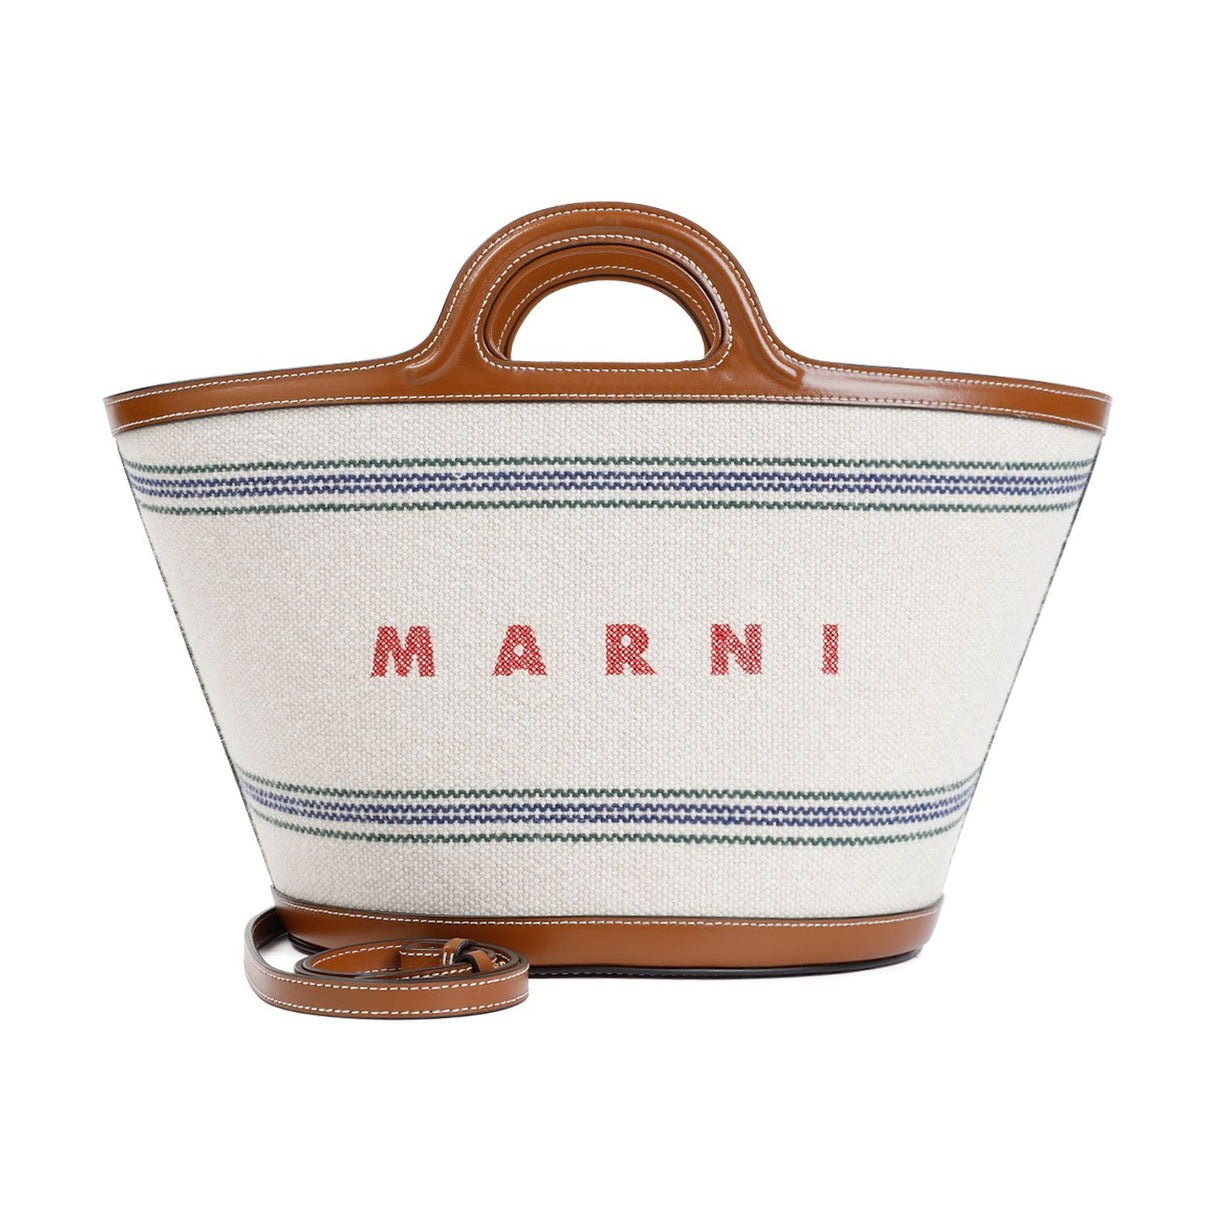 MARNI Chic Beige Mini Bucket Handbag in Cotton Blend and Leather for Women - 37x21x21 cm